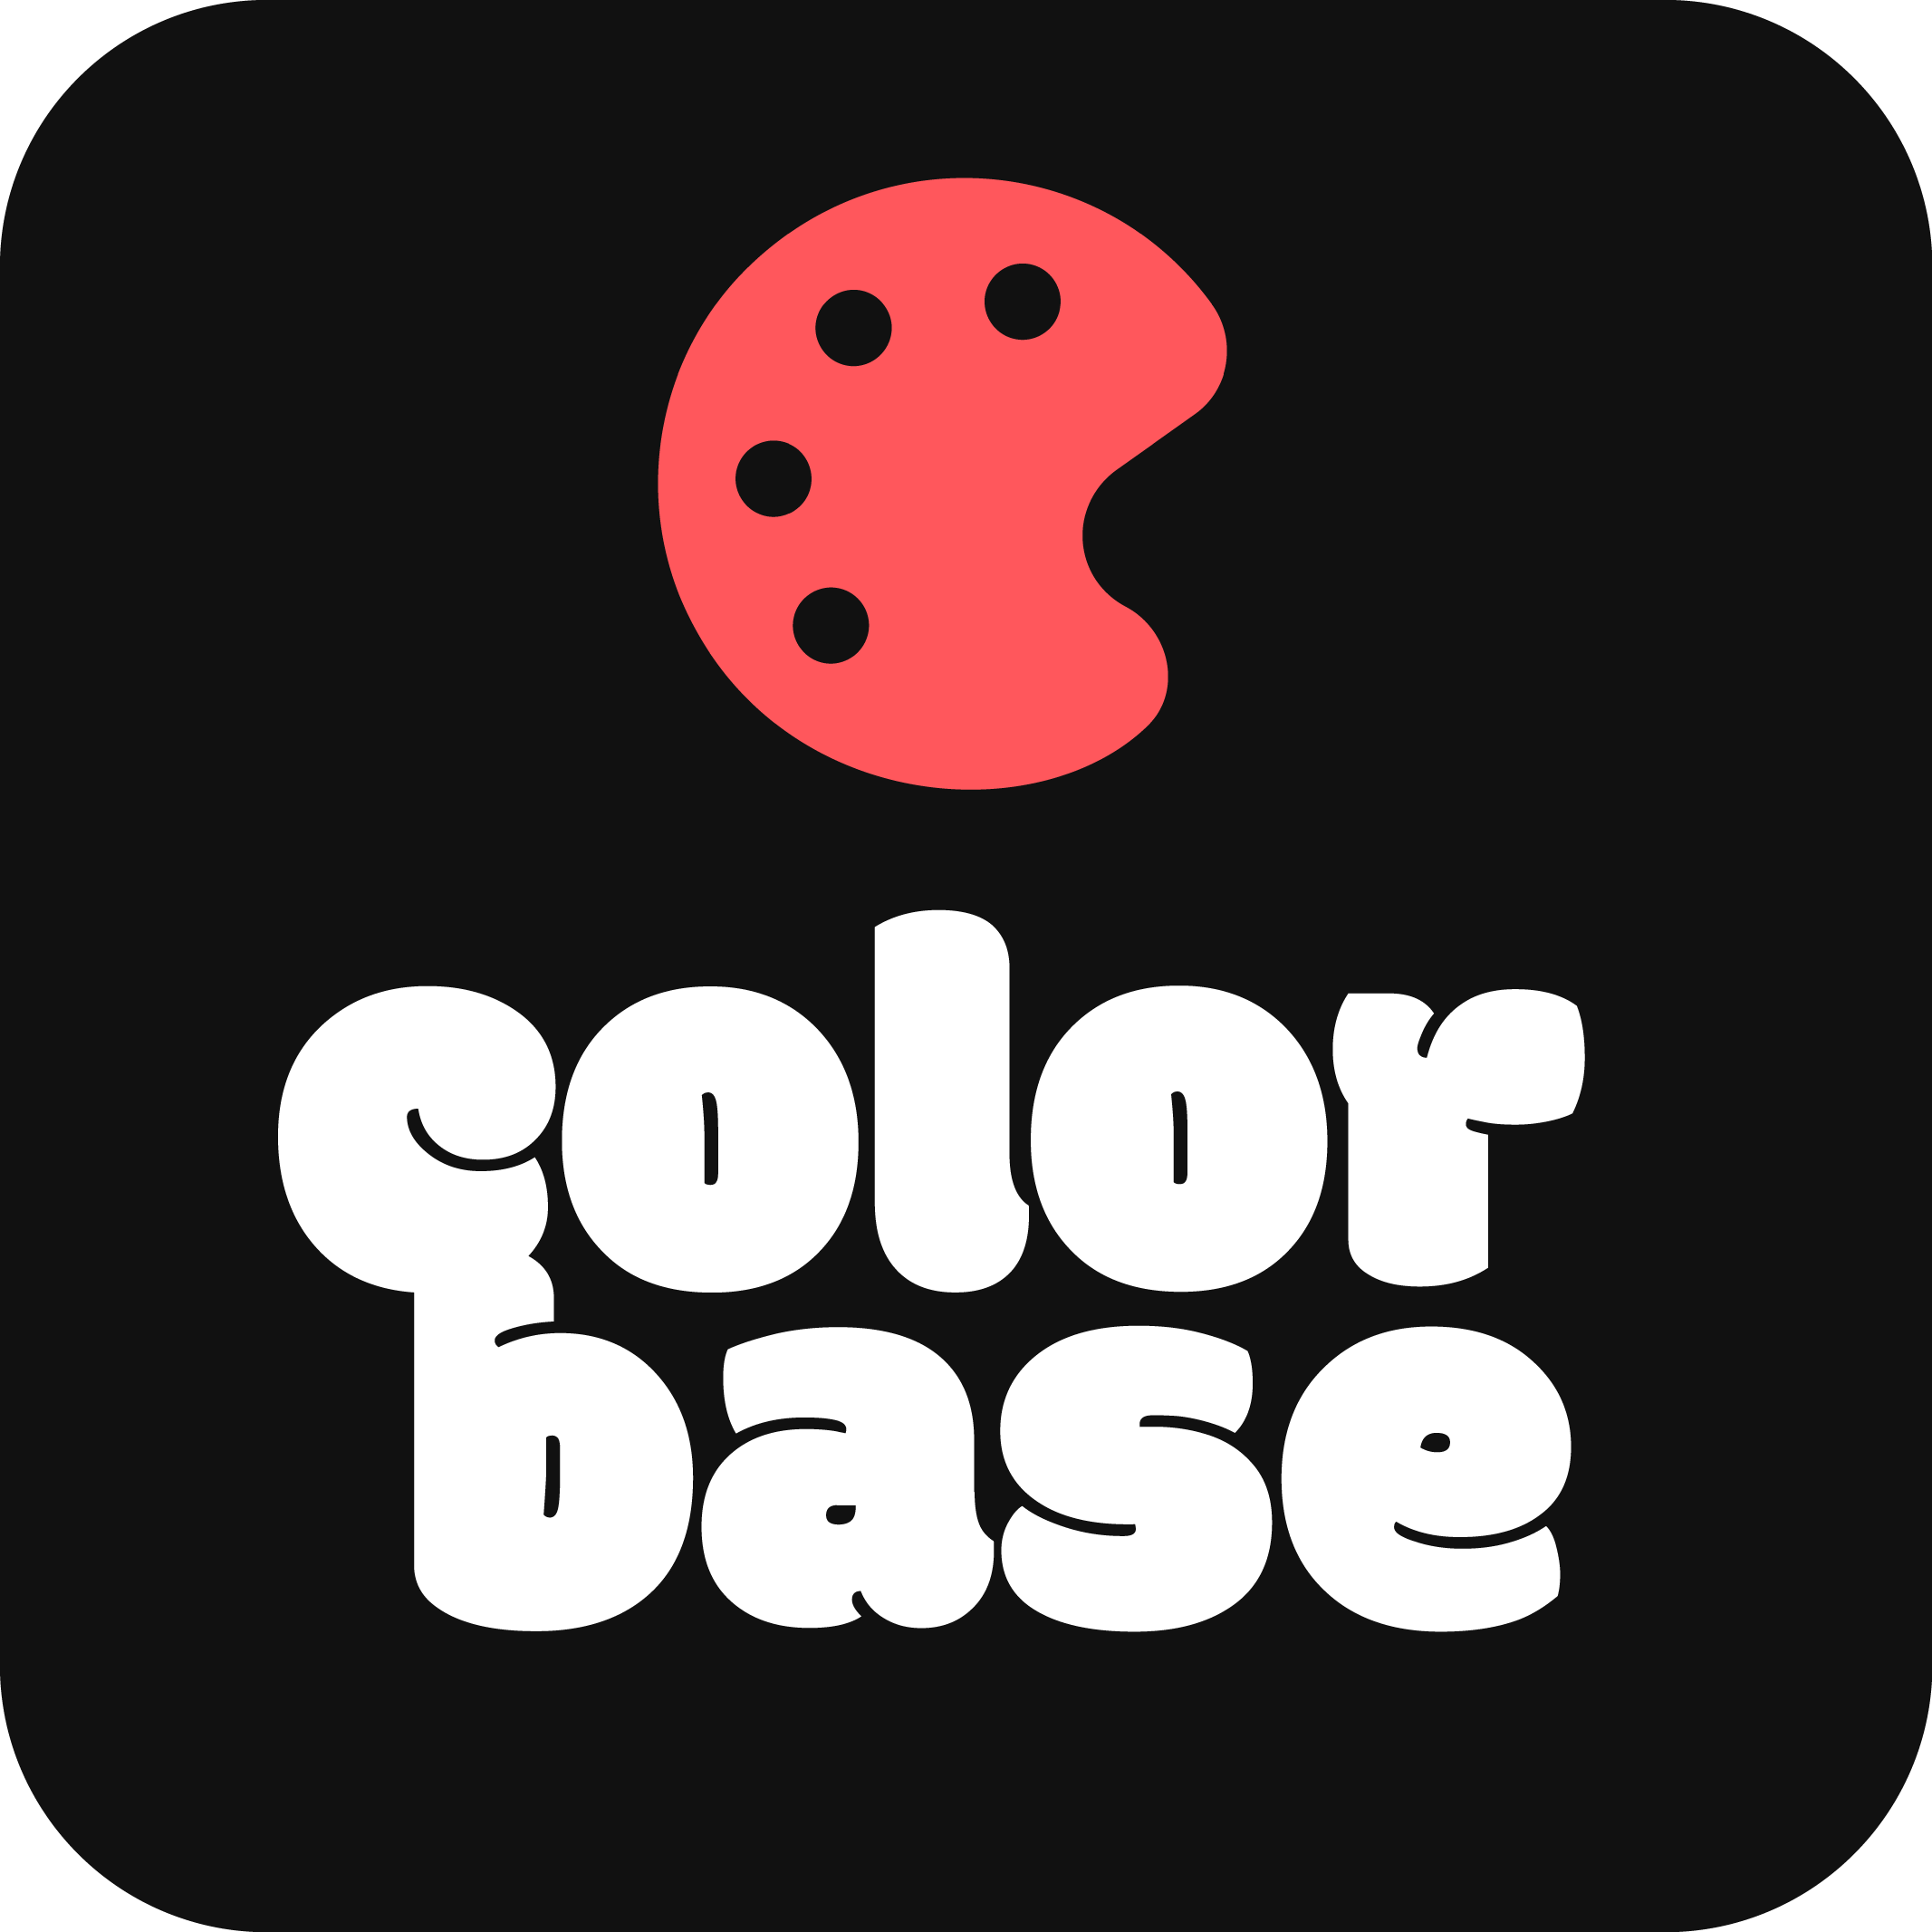 Colorbase - color tools